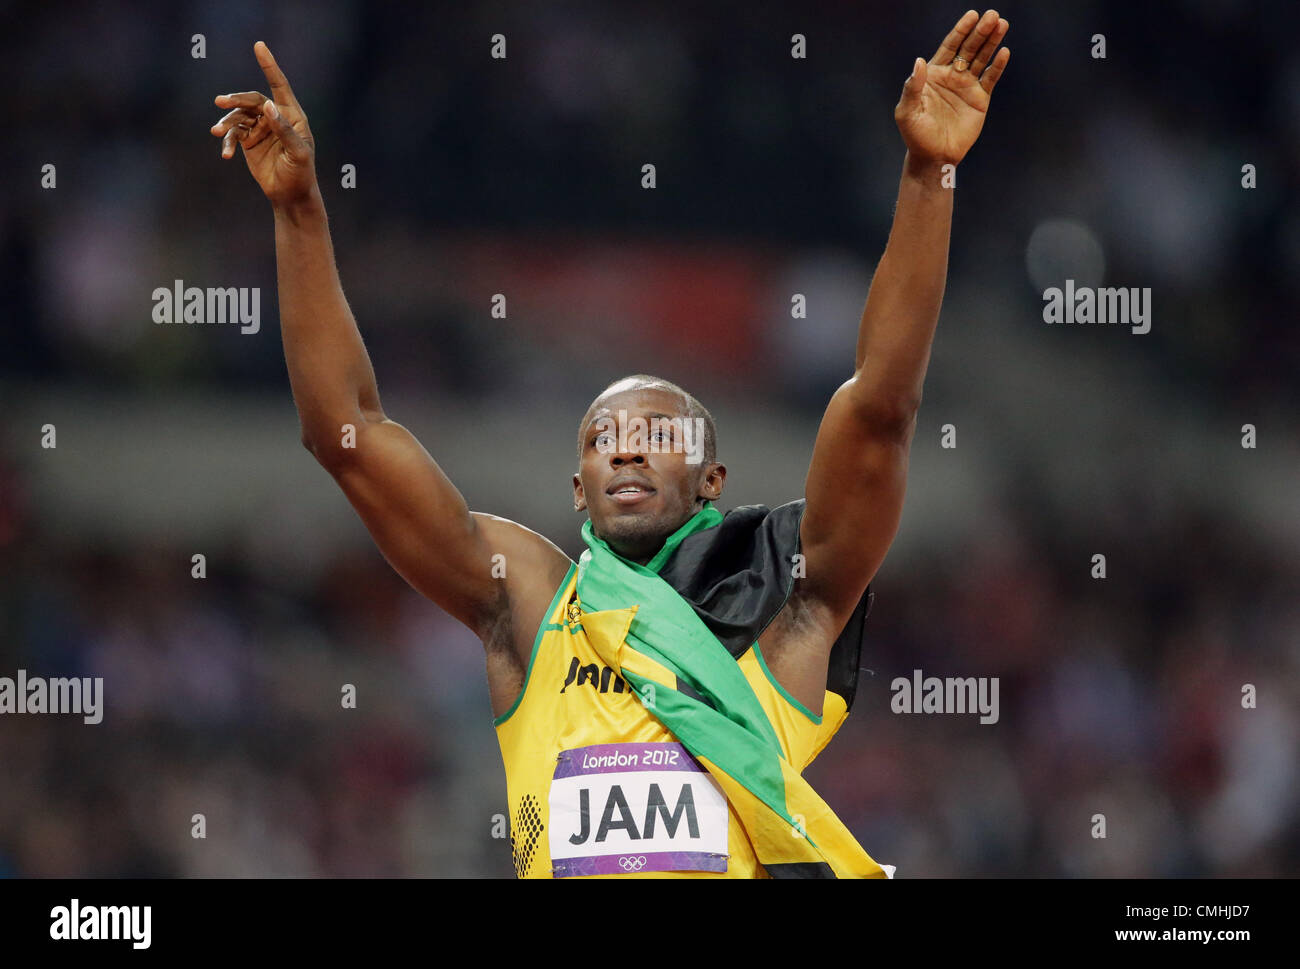 11.08.2012. London England. Usain Bolt of Jamaica celebrates after winning the Men's 4 x 100m Relay final of the  in Olympic Stadium at the London 2012 Olympic Games, London. Usain Bolt, anchoring the team helped the Jamaican team win the gold medal in 36.84 seconds setting a new world record. Stock Photo